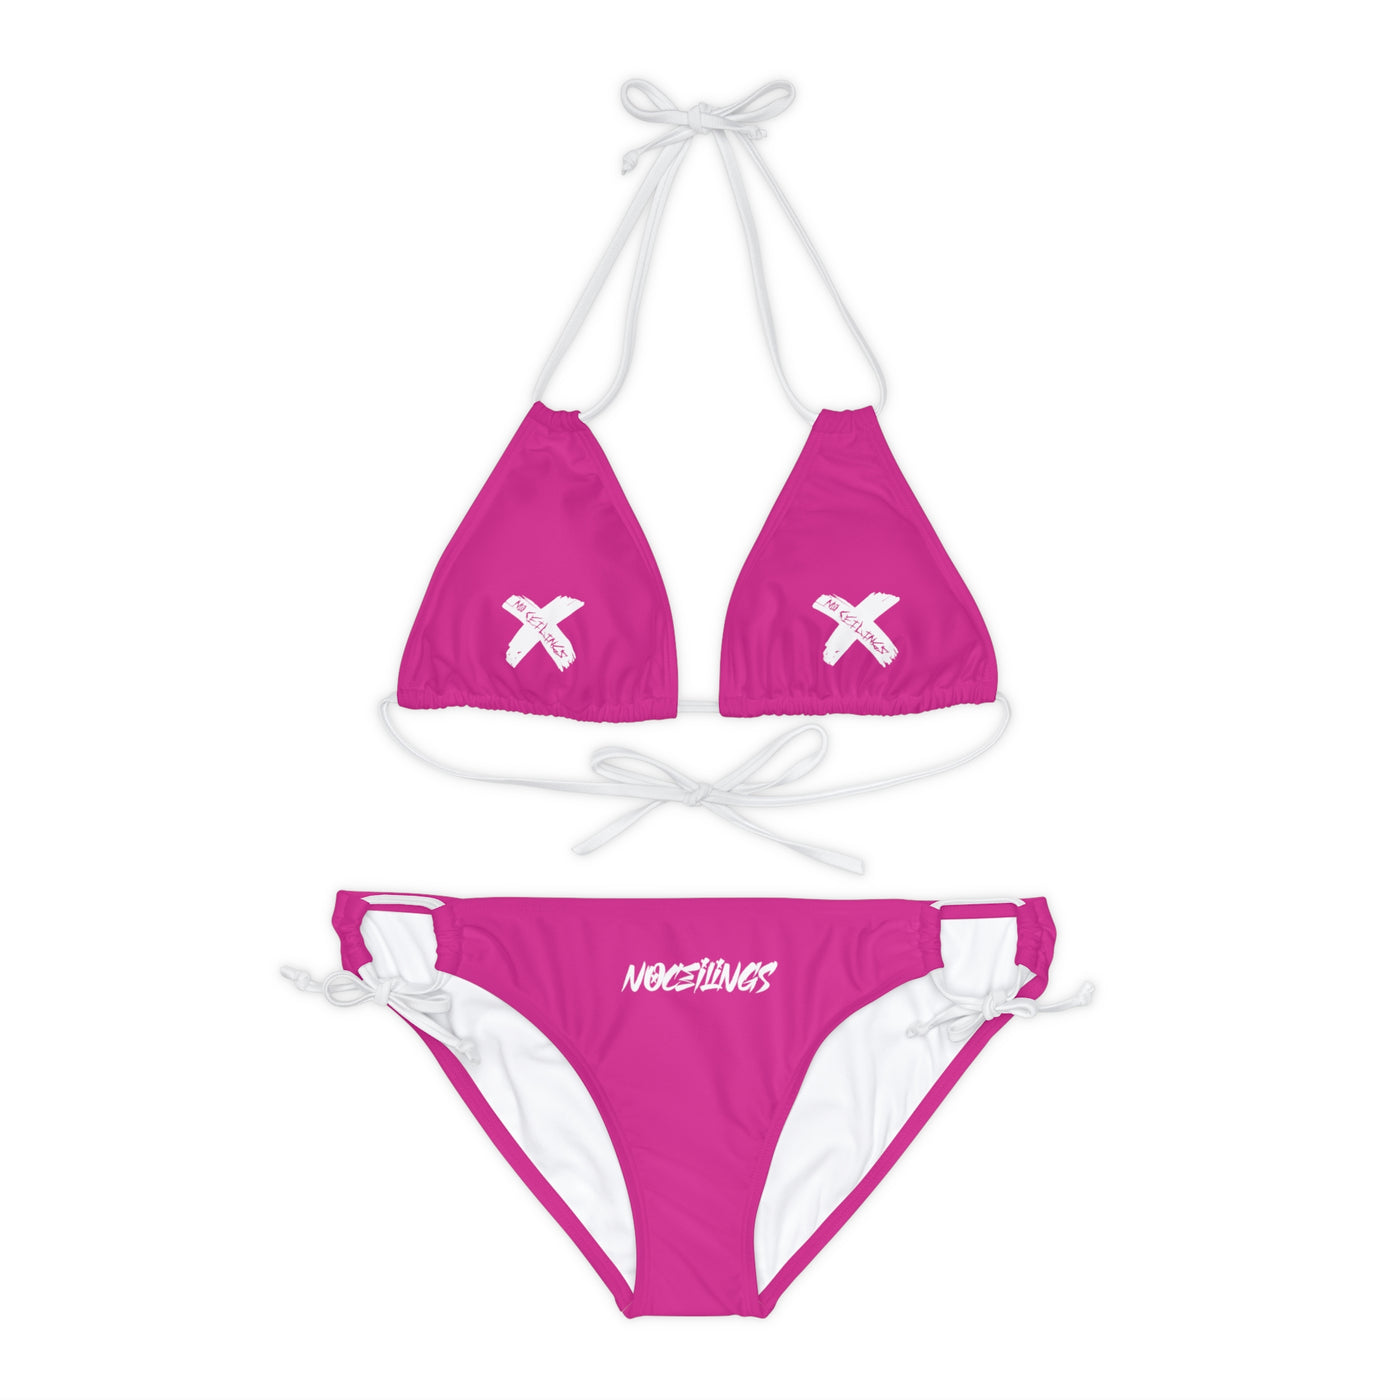 X Style Strappy Bikini Set IN Hot Pink - NoCeilingsClothing